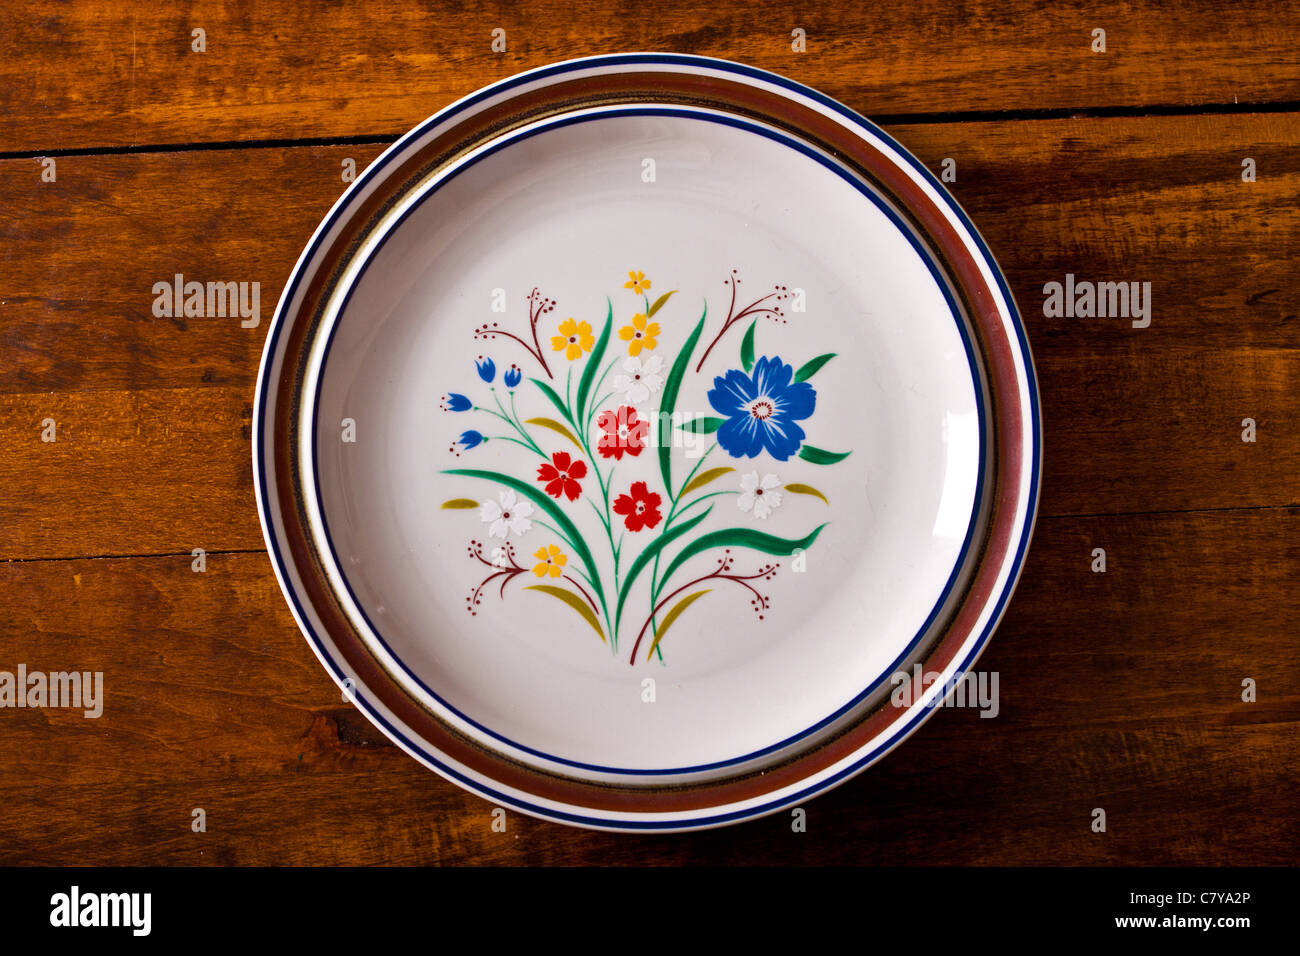 Top view of a stack of floral plates on a wooden surface Stock Photo